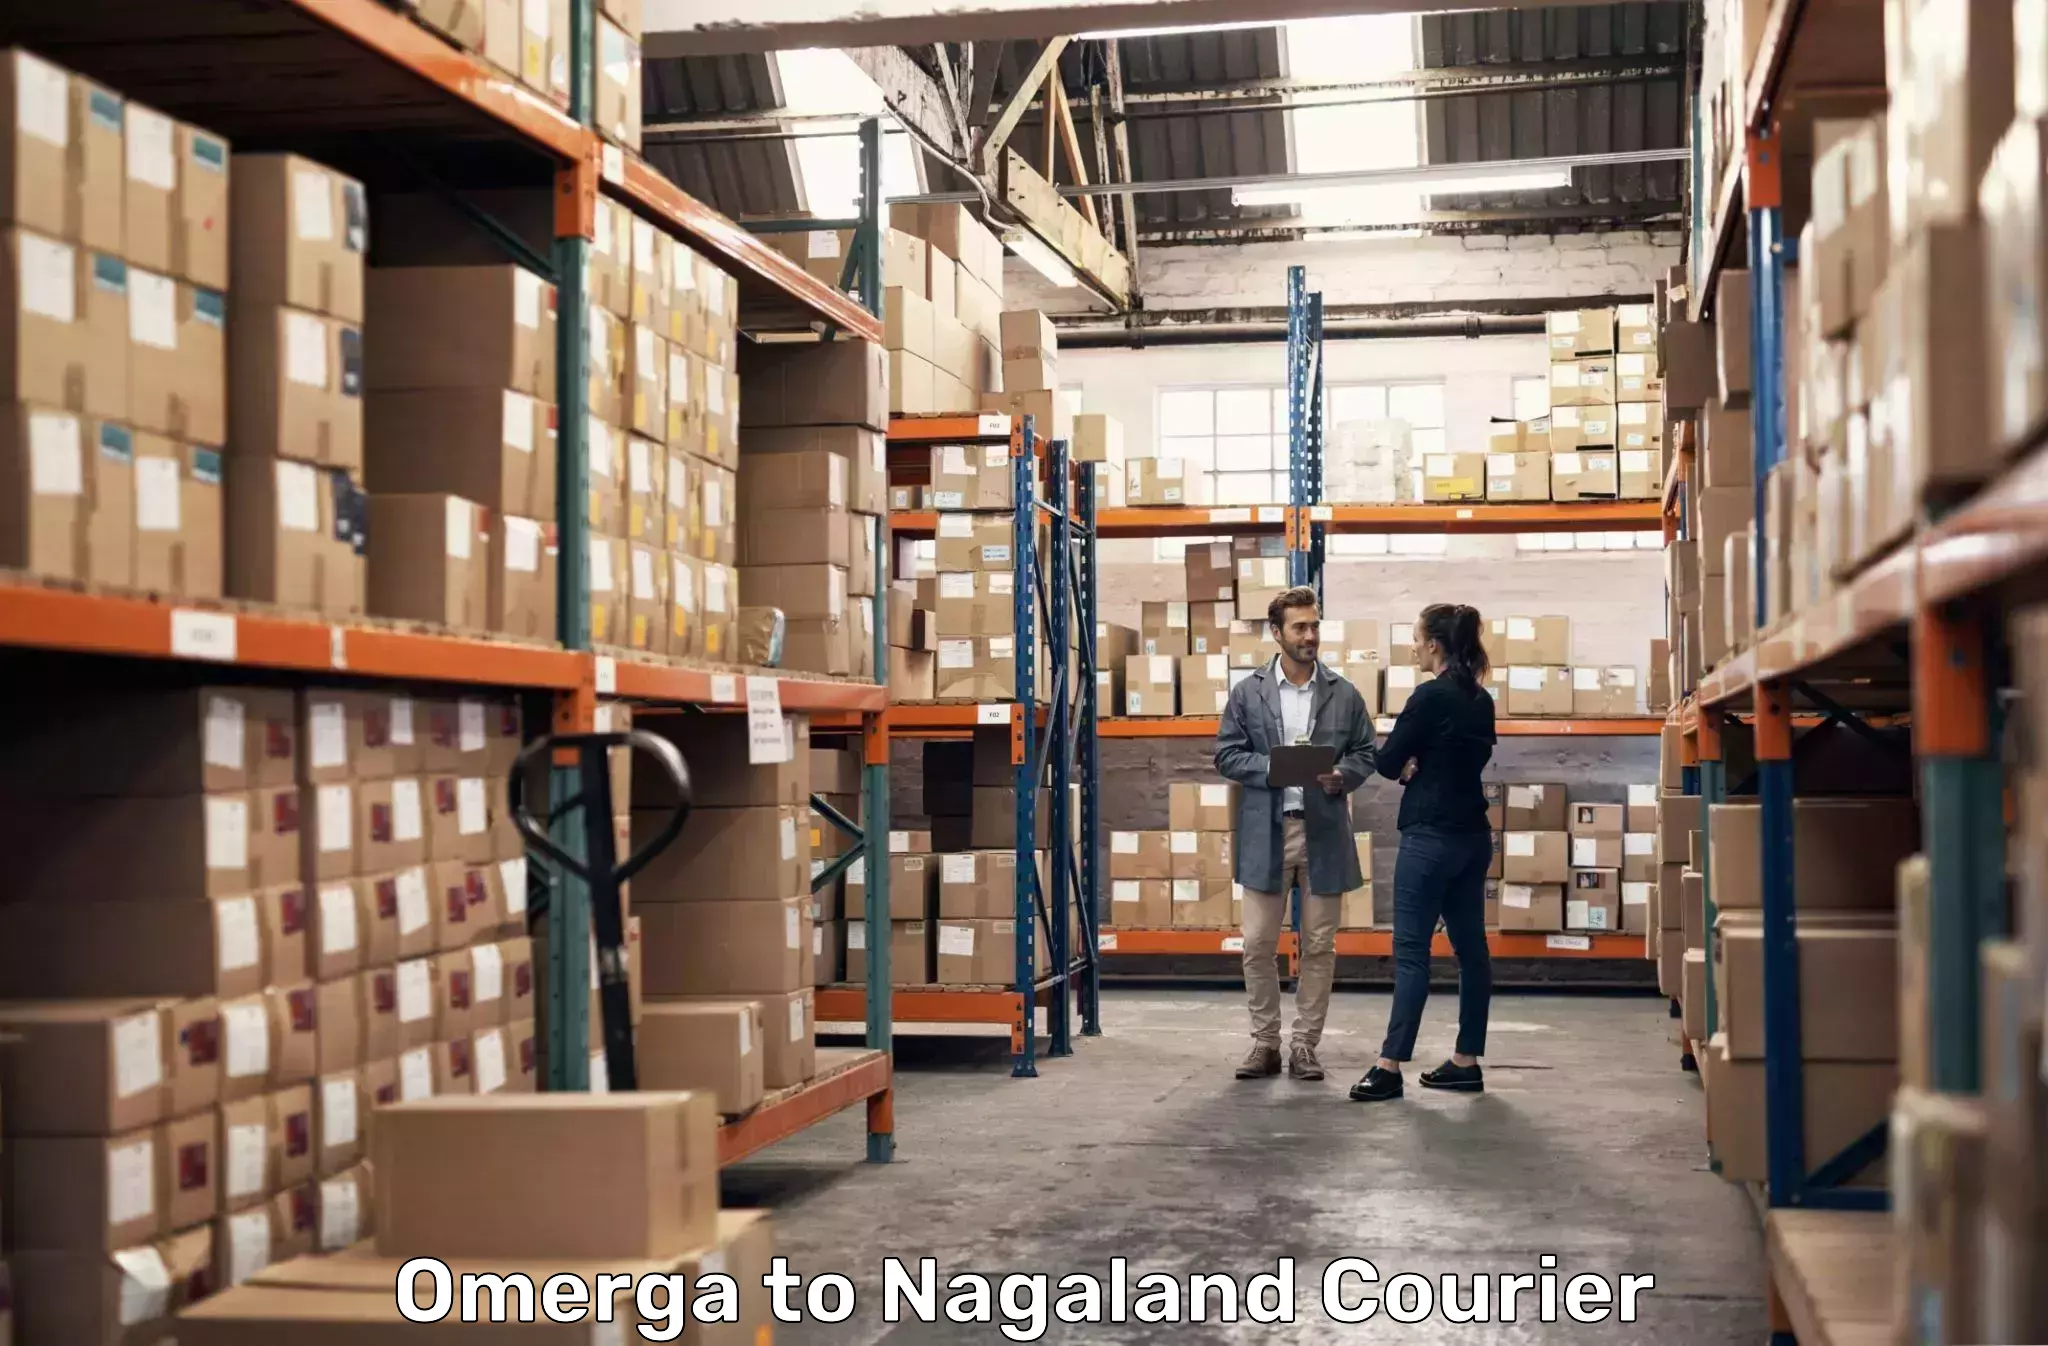 Multi-service courier options Omerga to Nagaland